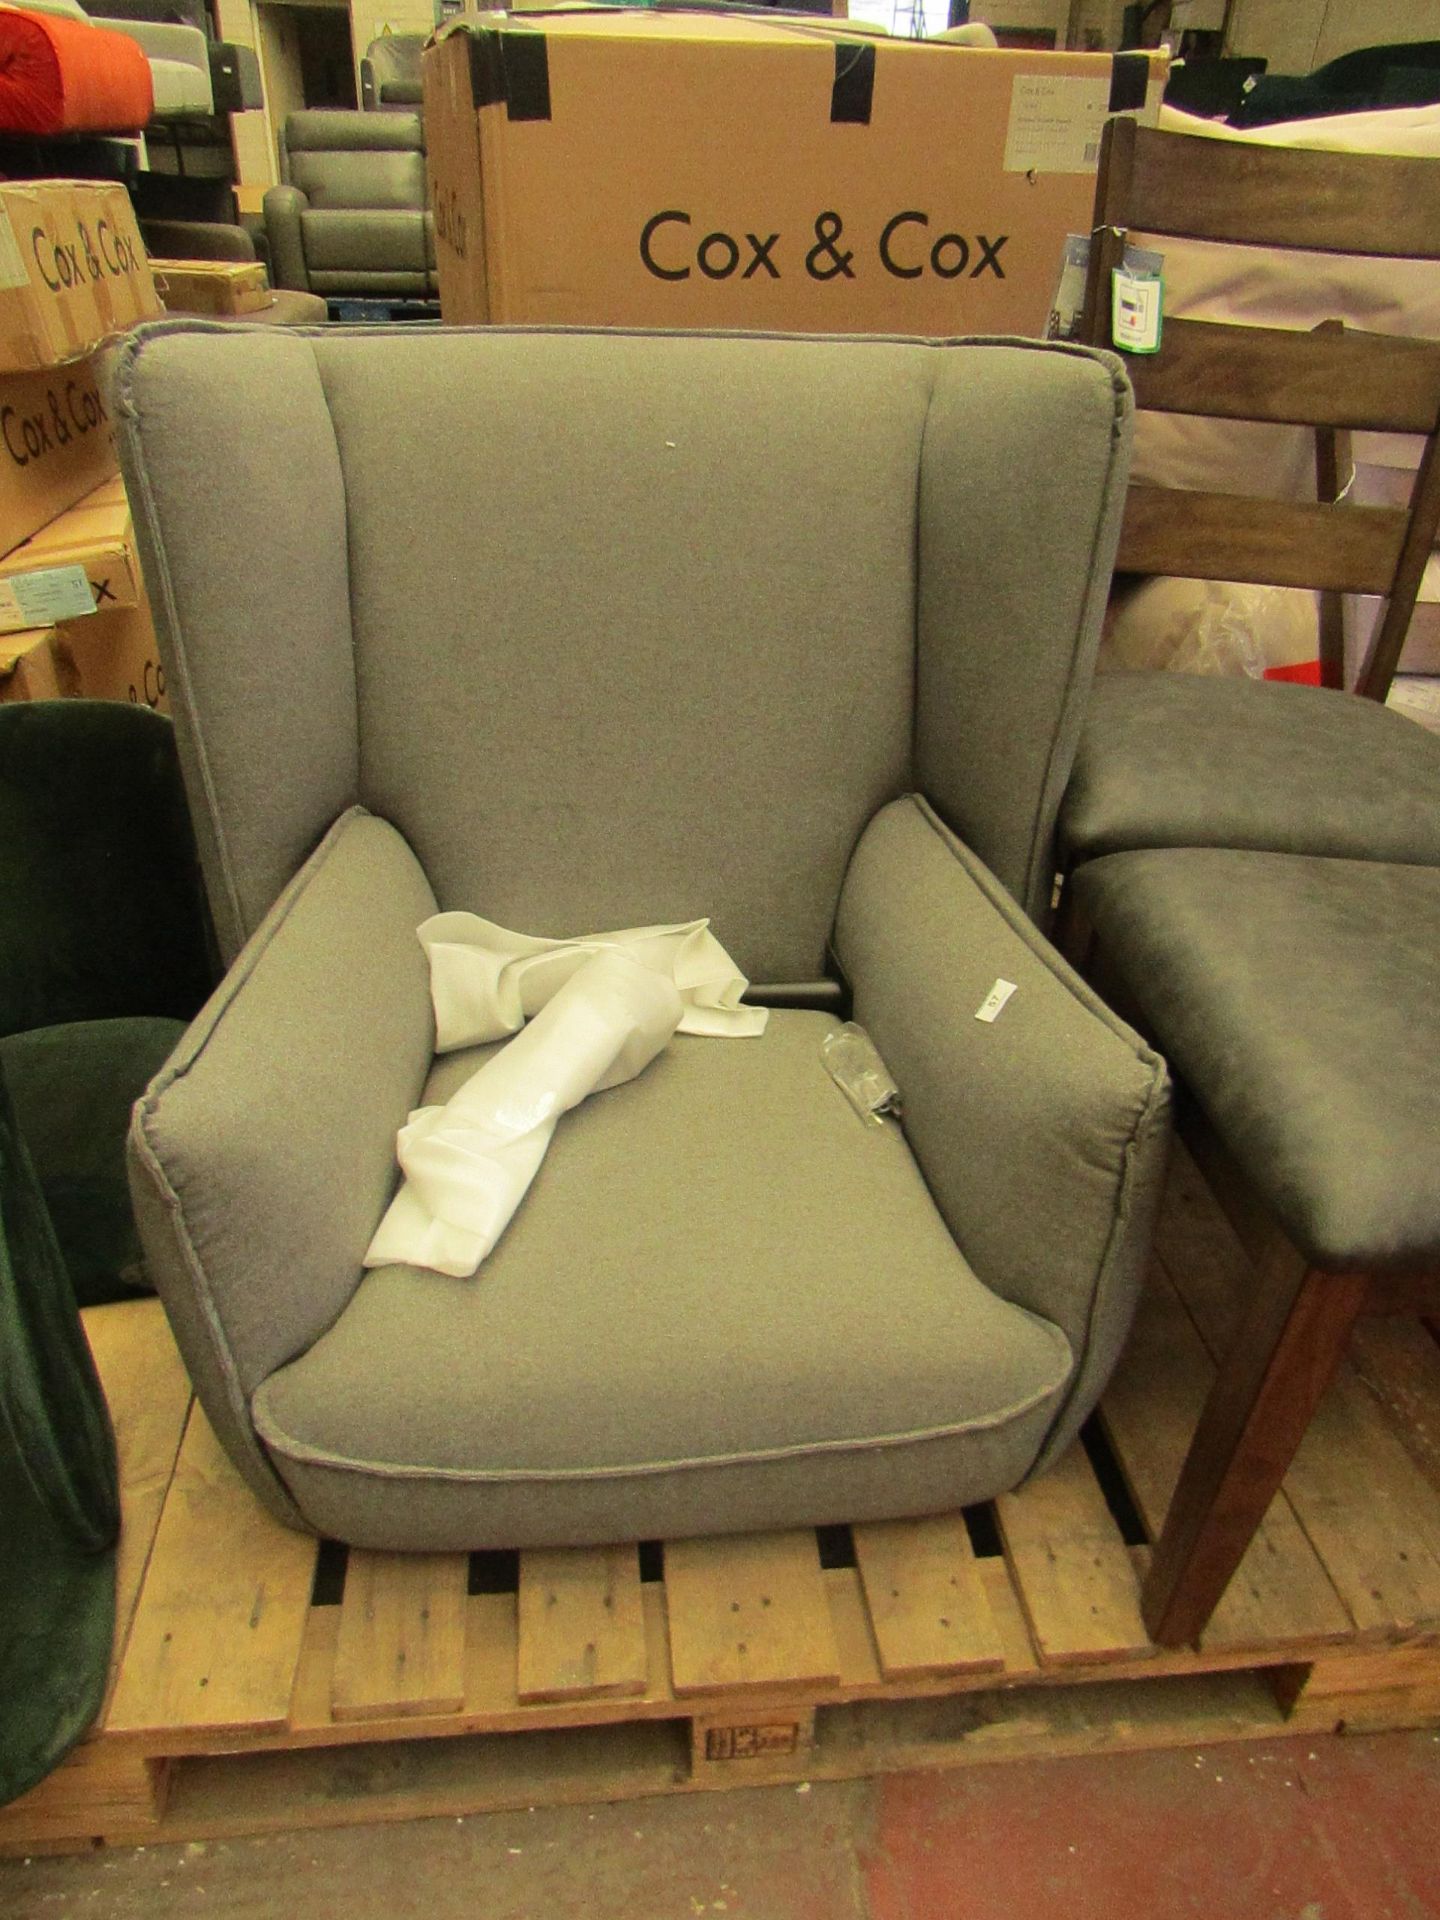 | 1X | MADE.COM GREY ARMCHAIR | RIPS AT THE BACK & LEGS PRESENT | RRP £279 |